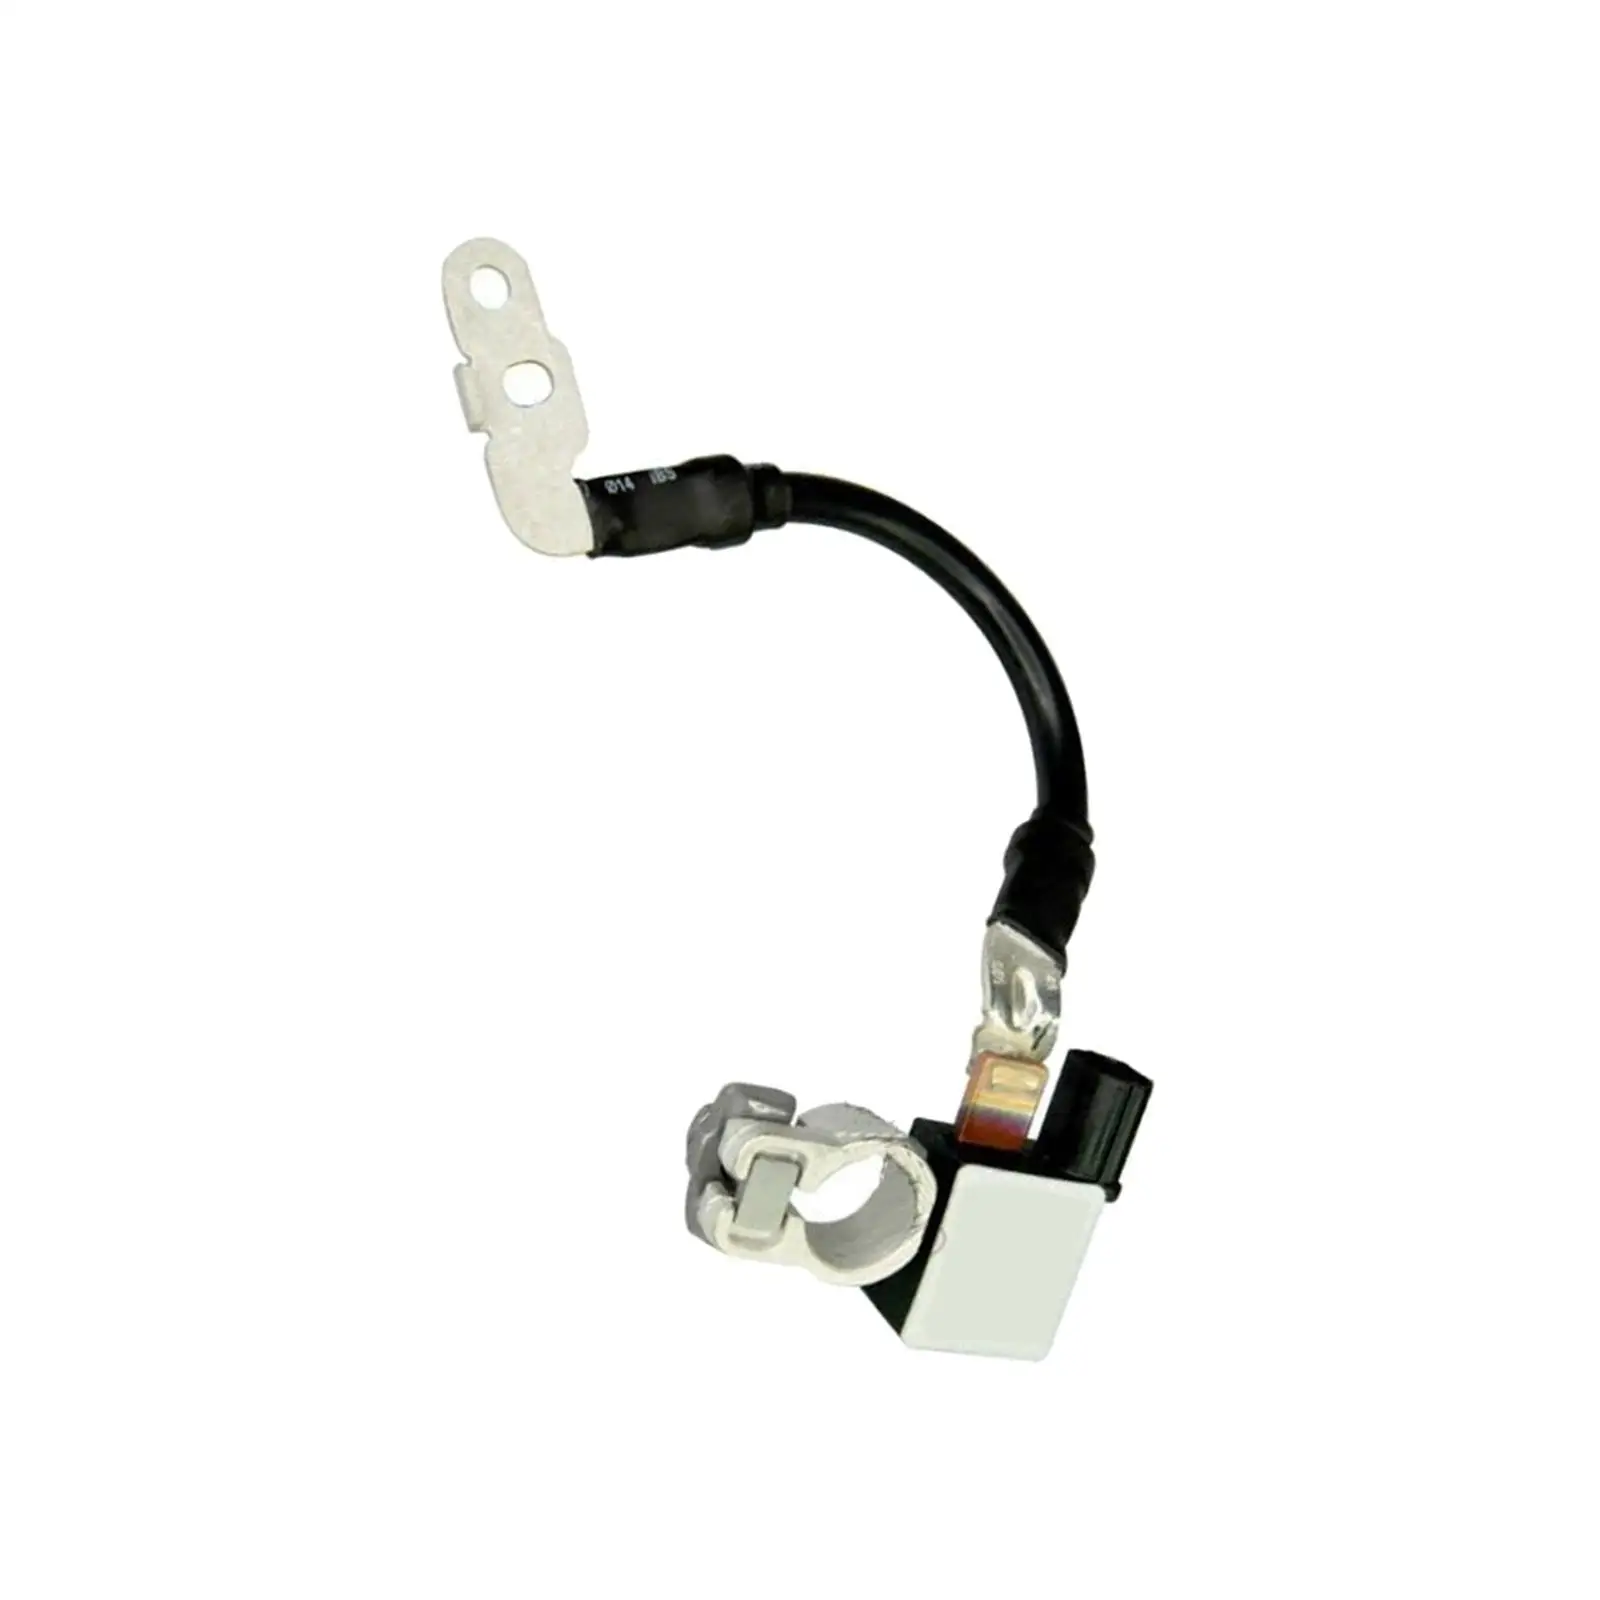 Vehicle Battery Negative Cable Sensor Assy 37180-3x300 37180A7000 37180-A7000 for Hyundai Elantra 2014-2016 Direct Replaces